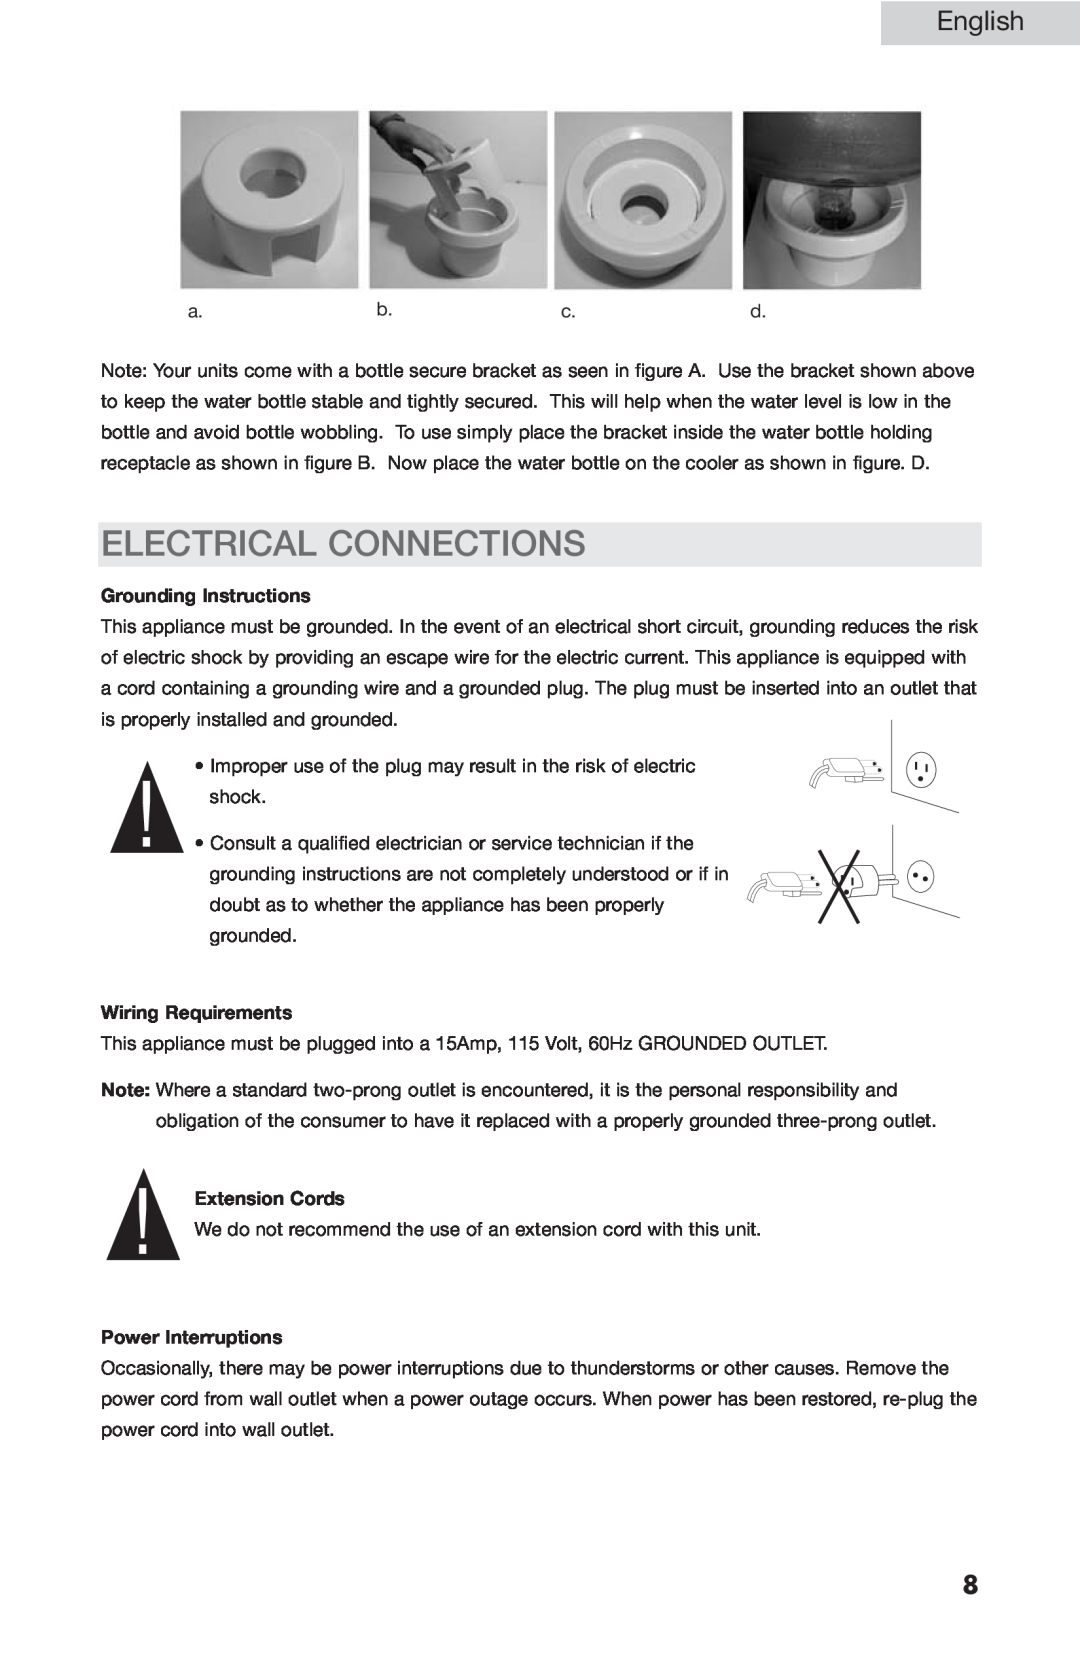 Haier WDNS201SS, WDNSC145 Electrical Connections, English, Grounding Instructions, Wiring Requirements, Extension Cords 